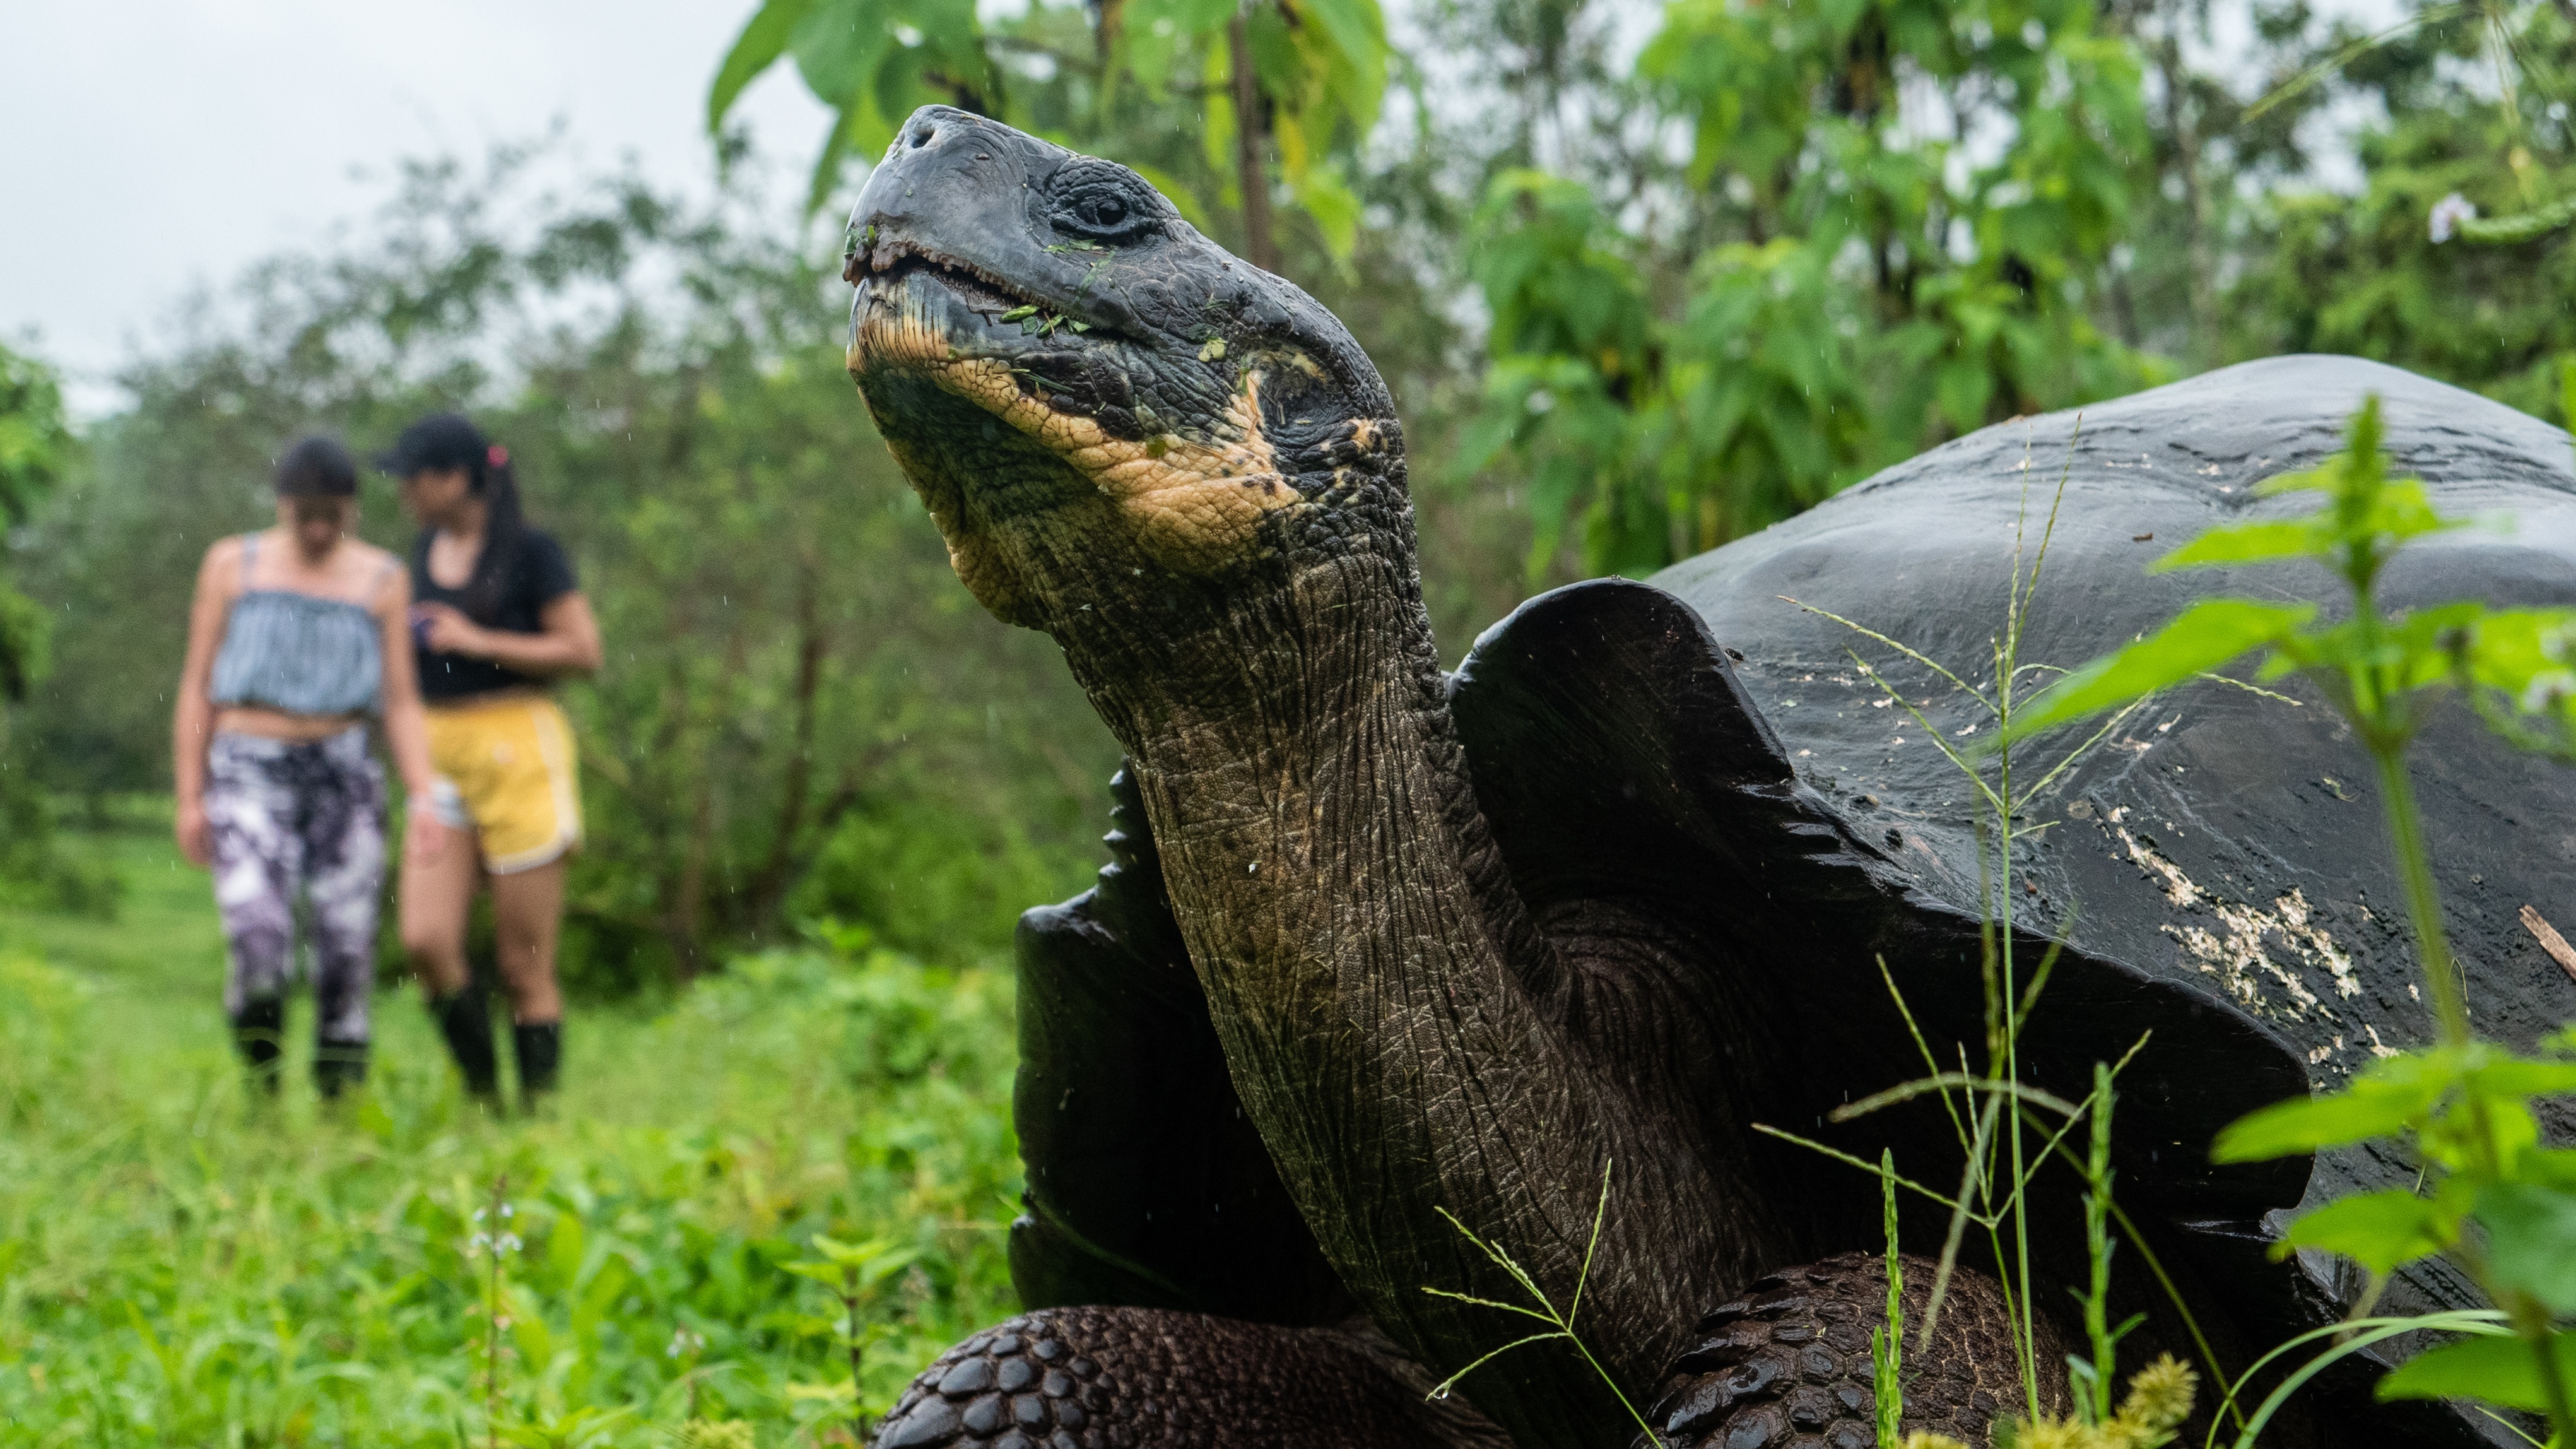 A tortoise on the Galapagos Islands